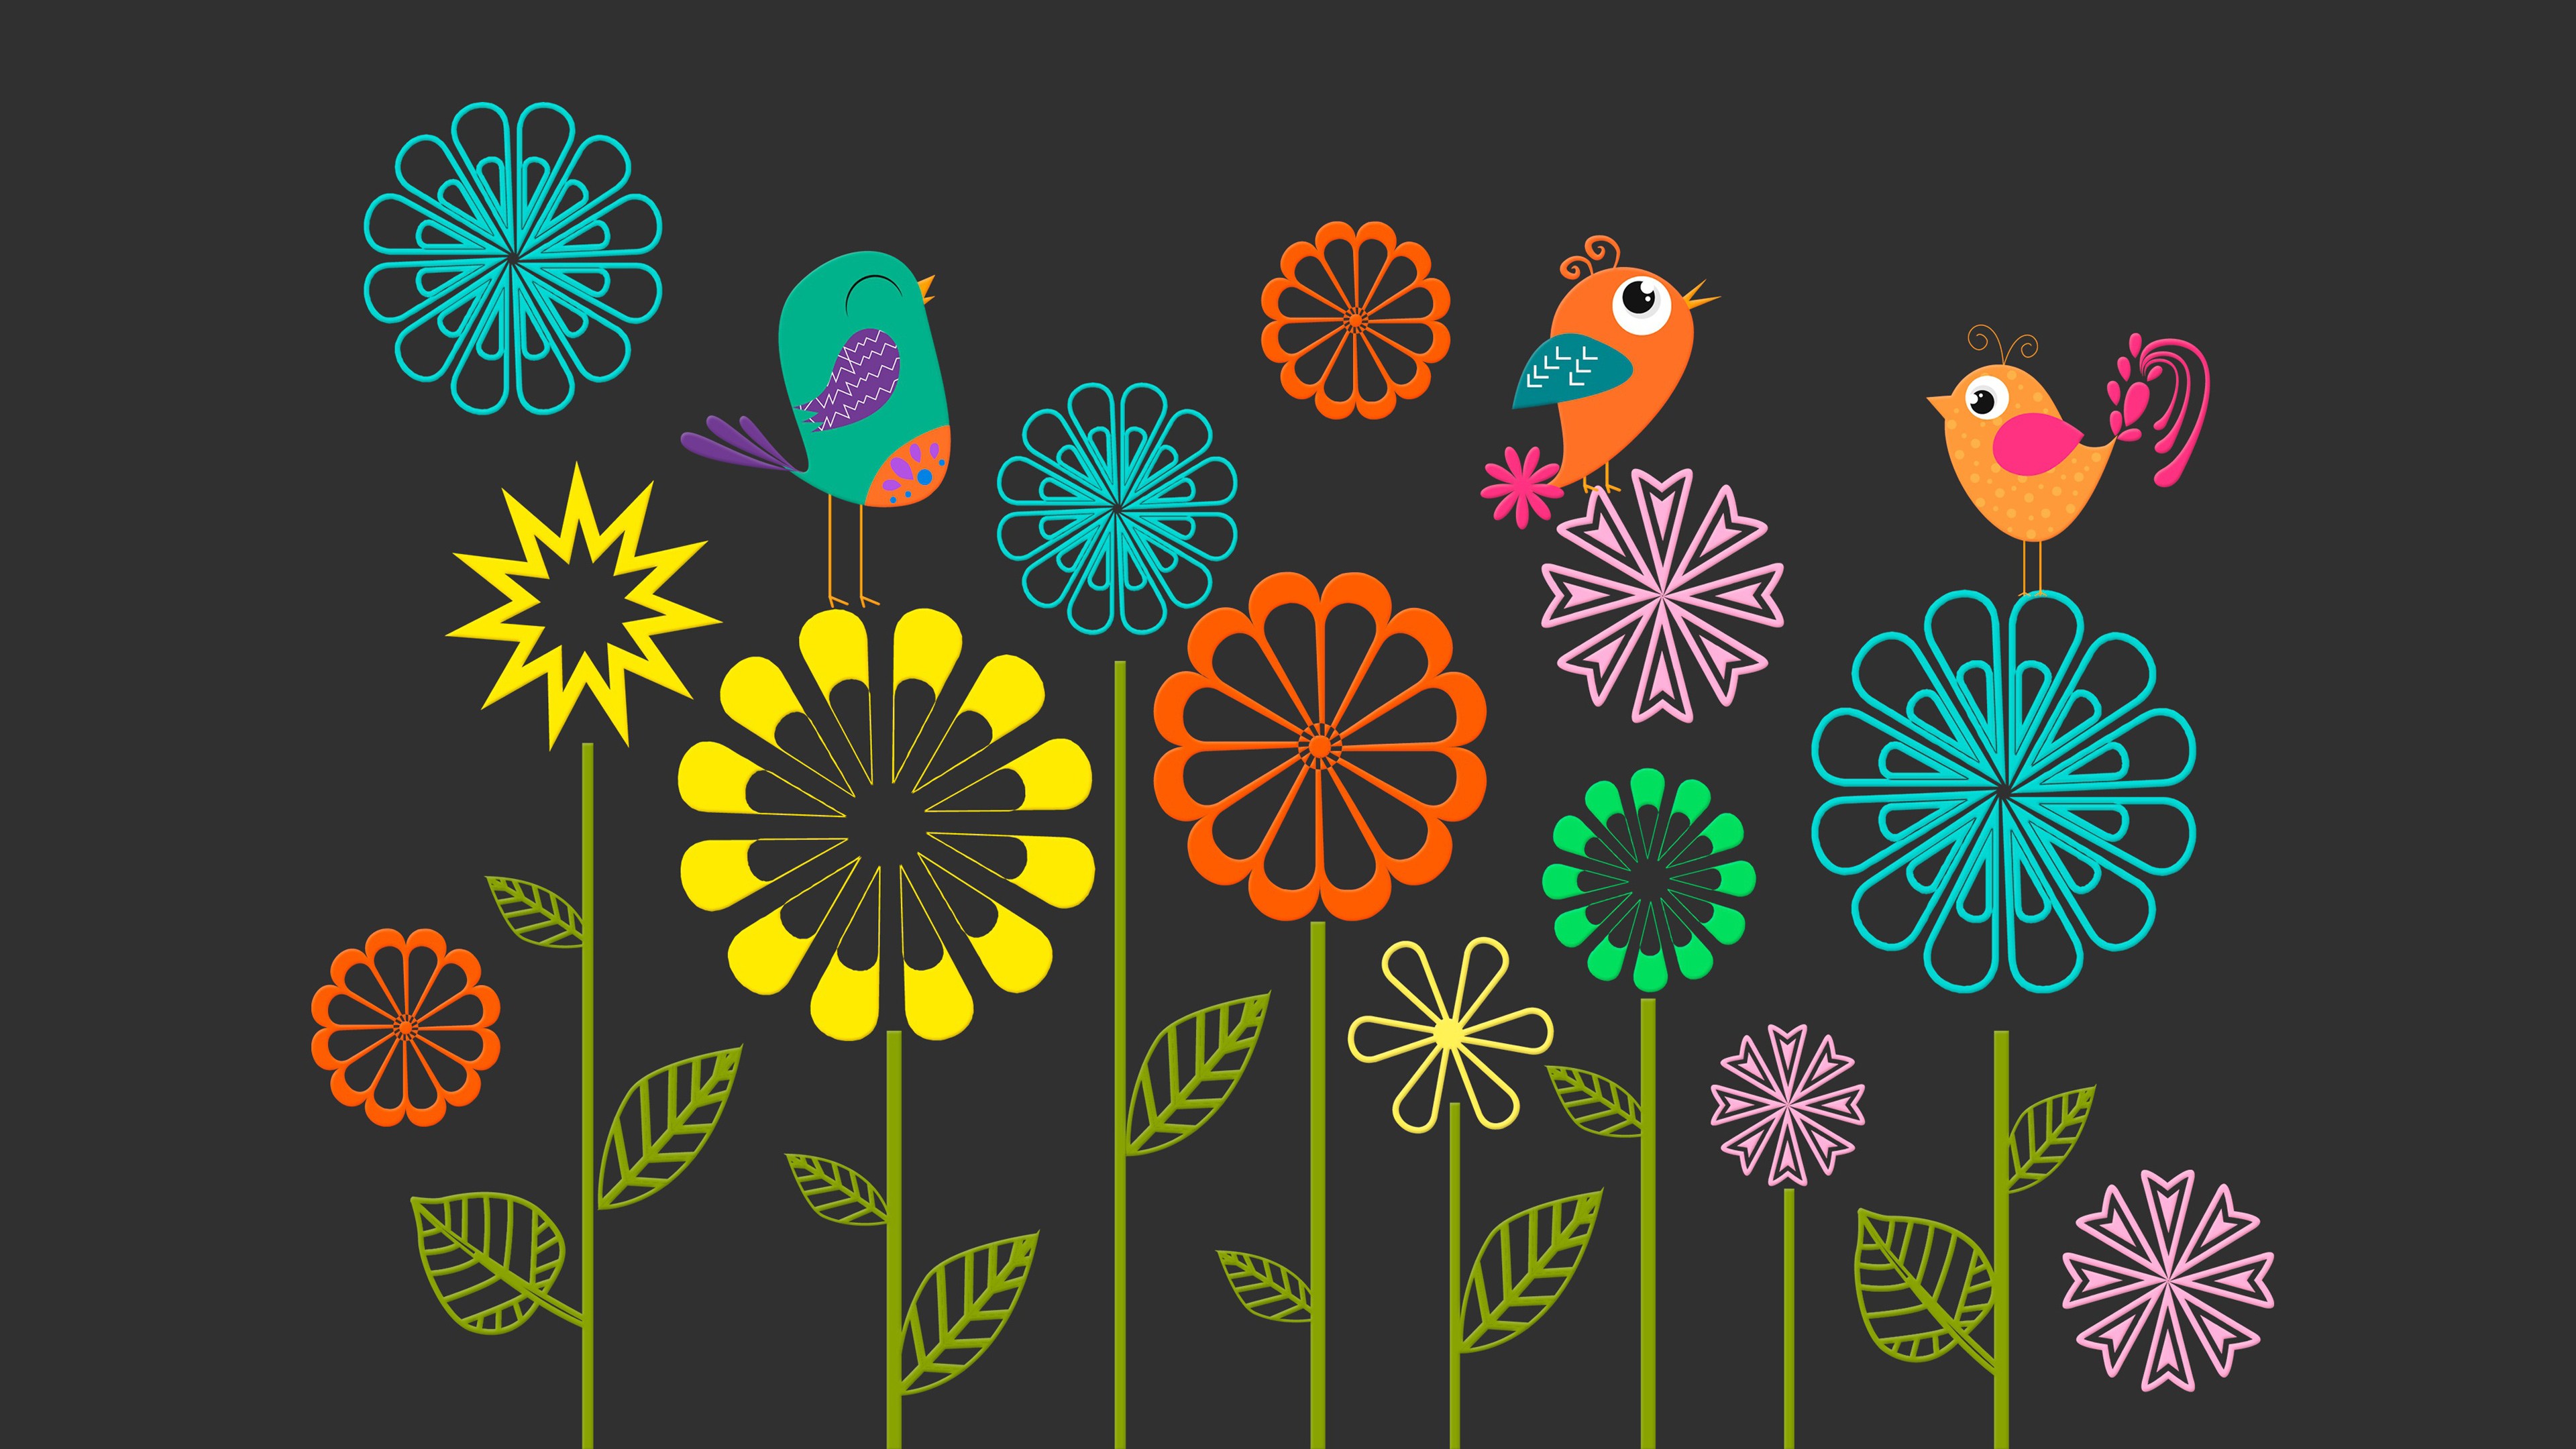 Colorful Vector Flowers Birds-3840x2160 - 4k Resolution Hd Wallpapers 4k  For Pc - 3840x2160 Wallpaper 